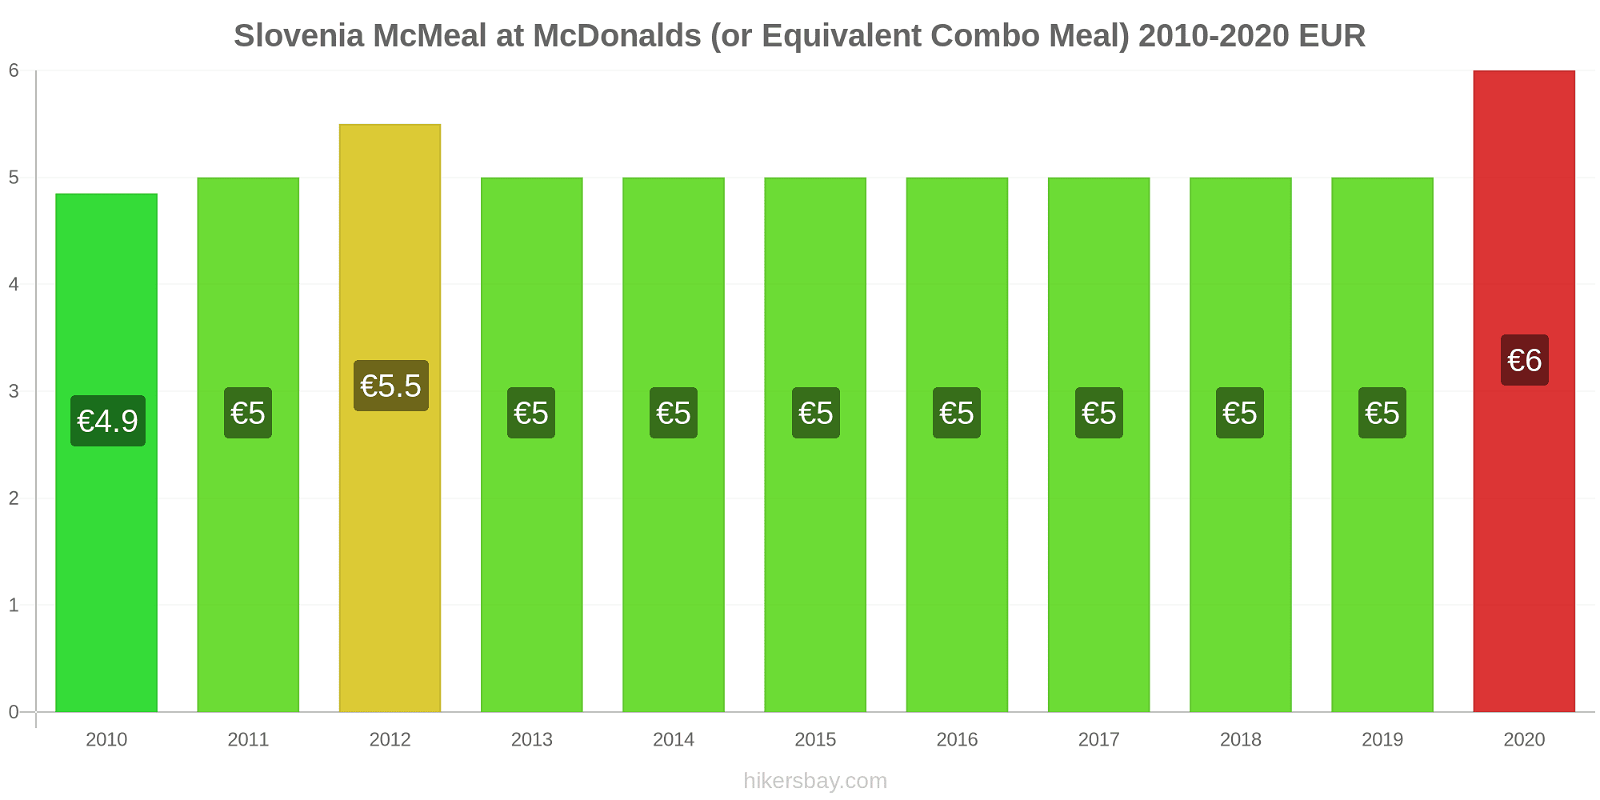 Slovenia price changes McMeal at McDonalds (or Equivalent Combo Meal) hikersbay.com